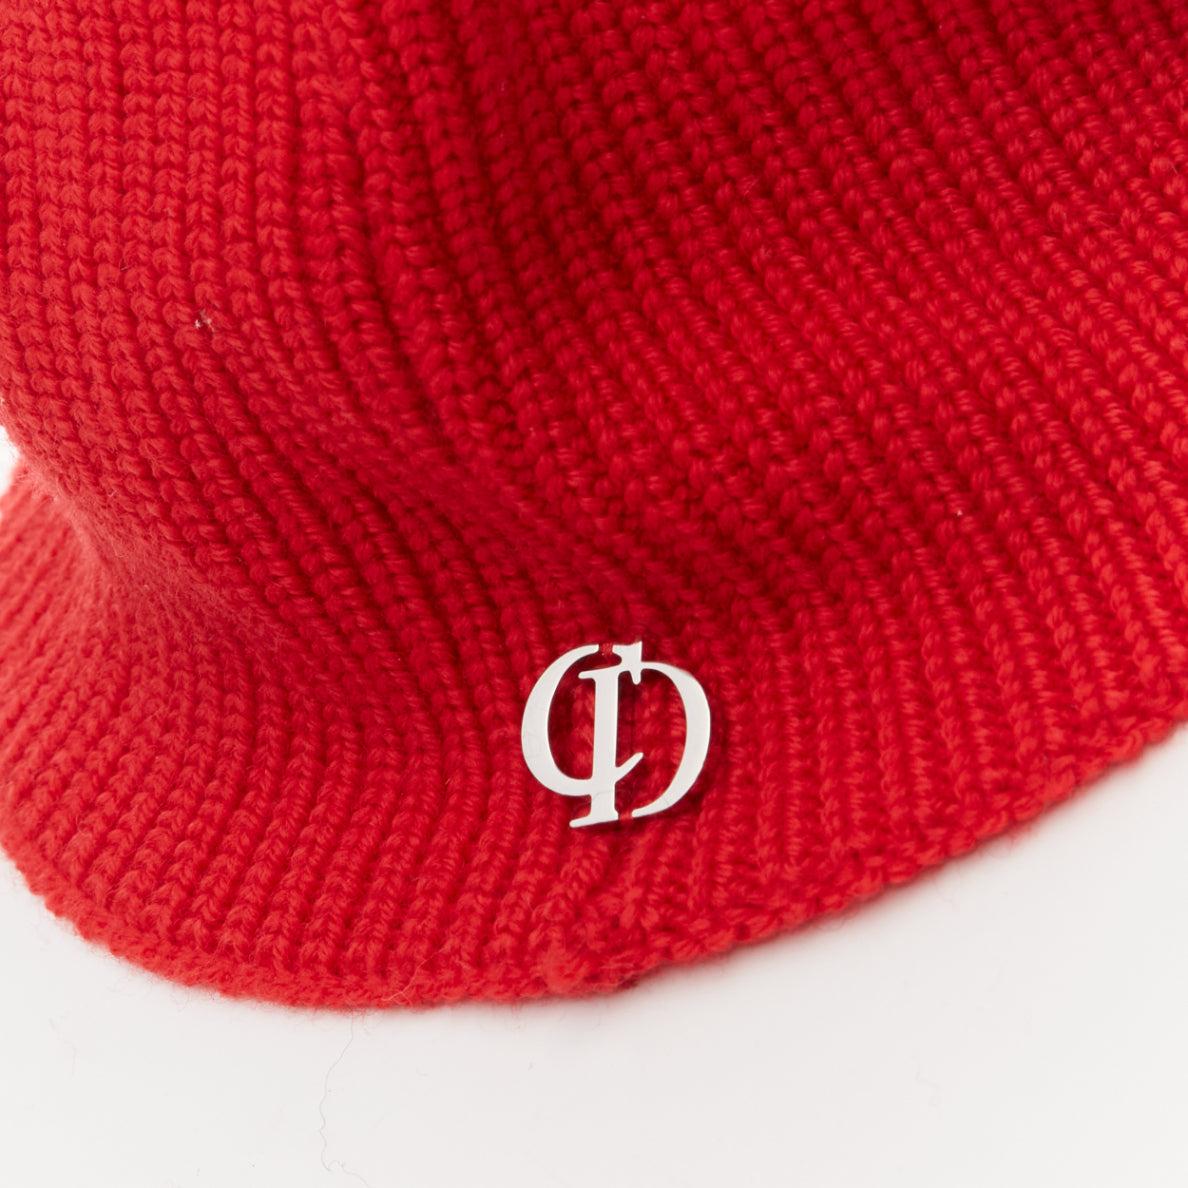 CHRISTIAN DIOR 100% wool red CD logo charm ribbed neck warmer collar
Reference: BSHW/A00140
Brand: Christian Dior
Material: Wool
Color: Red
Pattern: Solid
Closure: Elasticated
Lining: Red Wool
Made in: Italy

CONDITION:
Condition: Excellent, this